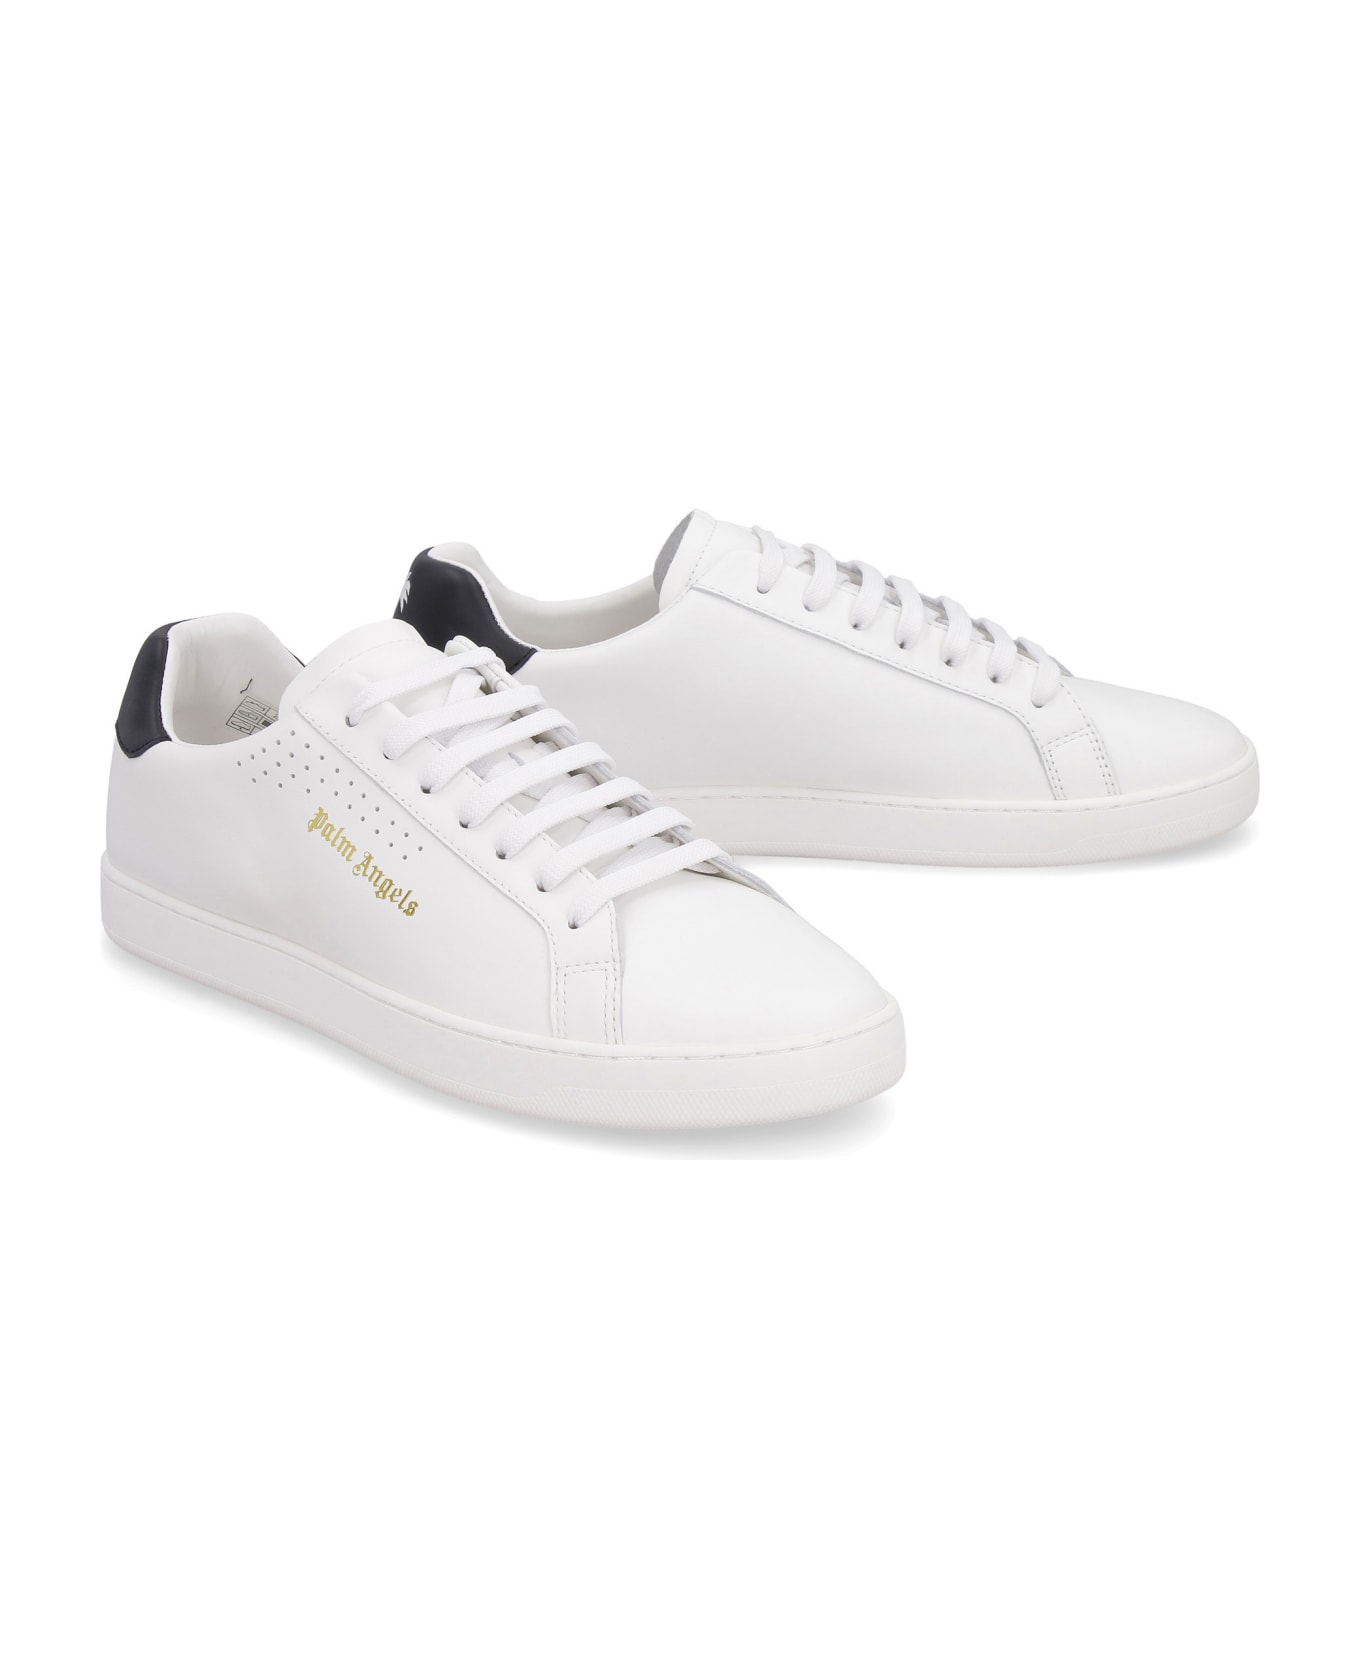 Palm Angels New Tennis Leather Sneakers - White スニーカー